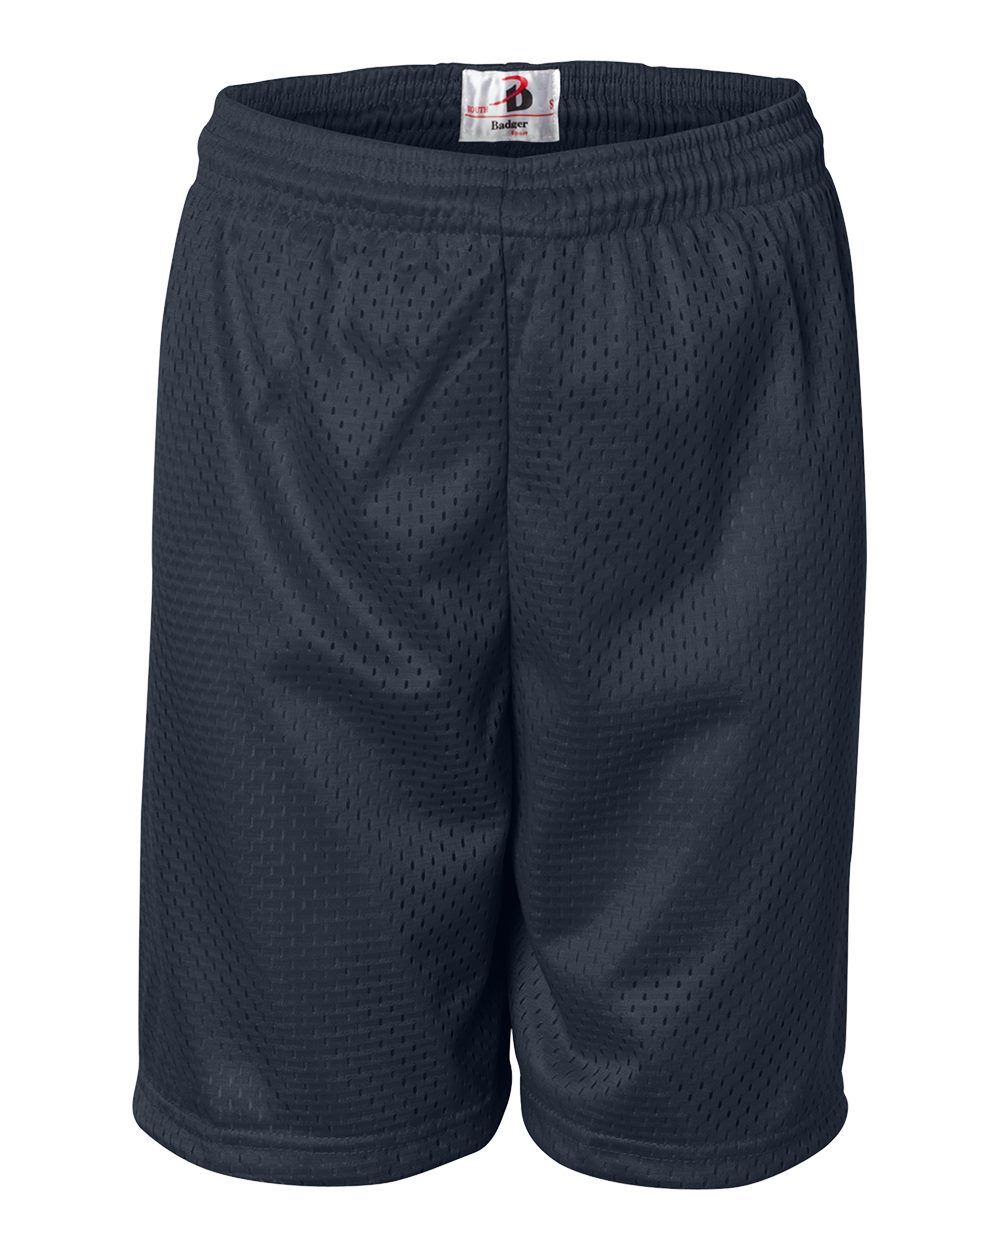 Badger Youth Mesh/Tricot 6-Inch Shorts 2207